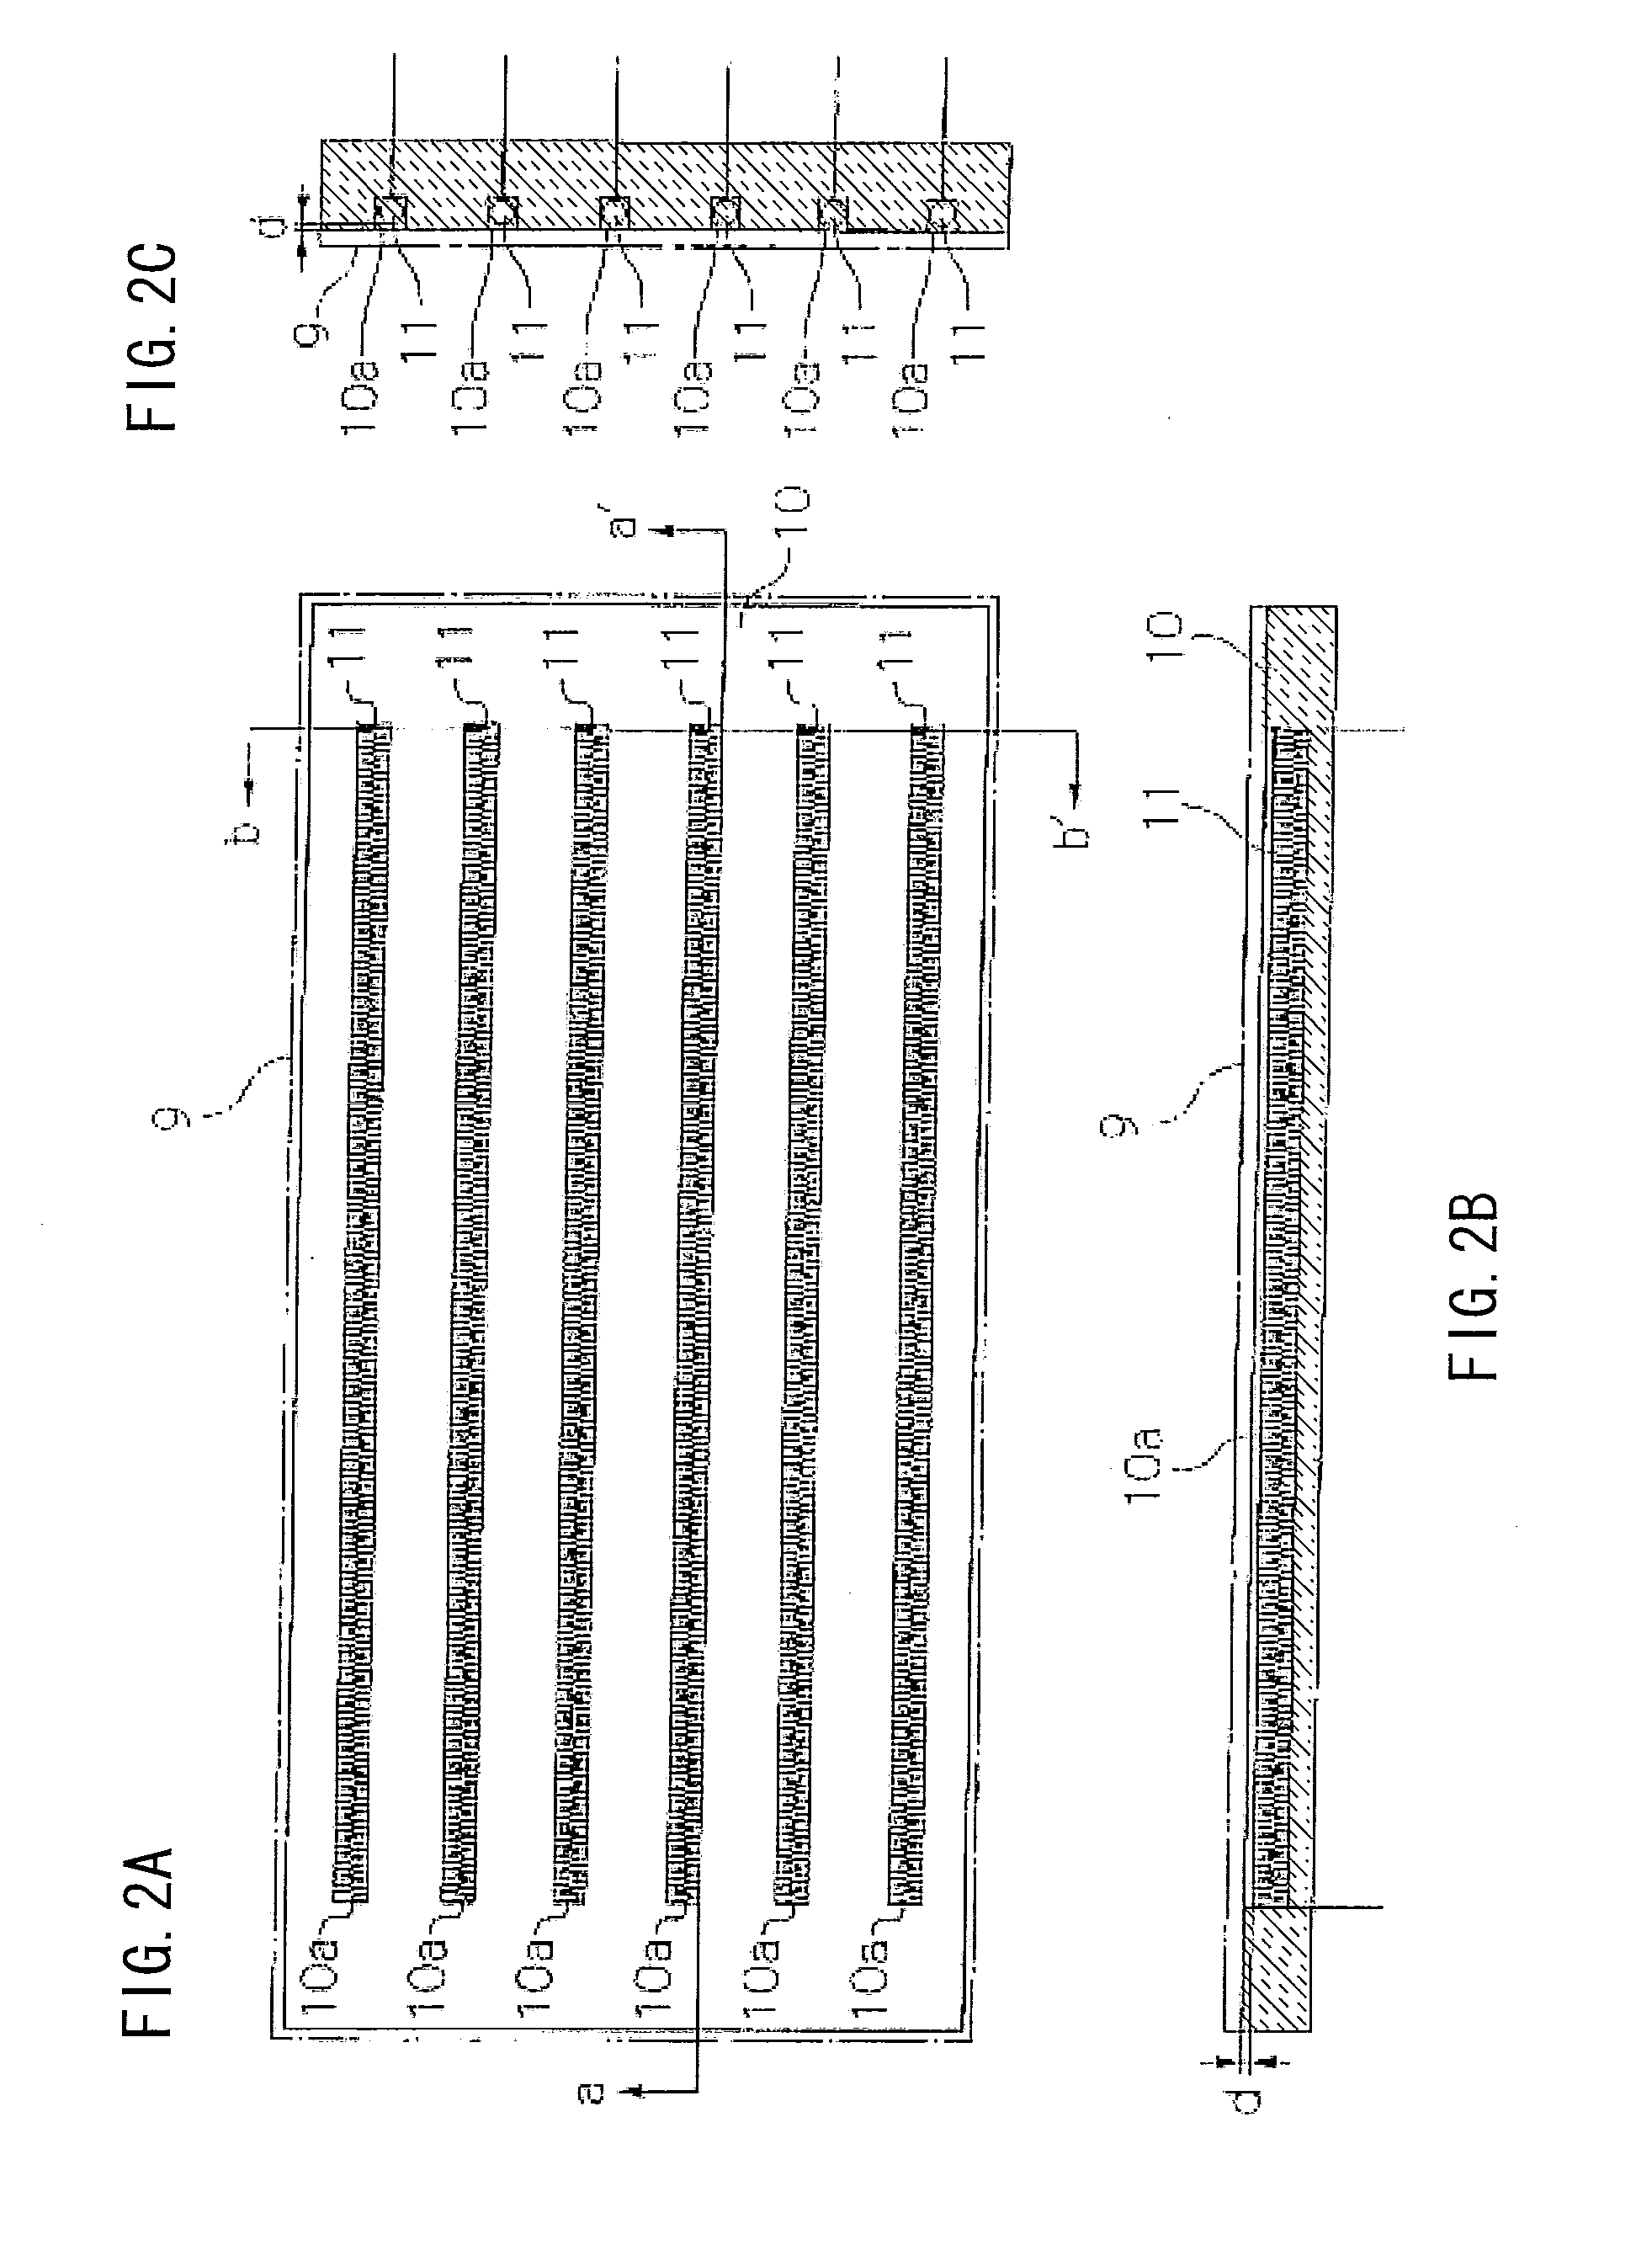 Solder bath and method of heating solder contained in the solder bath